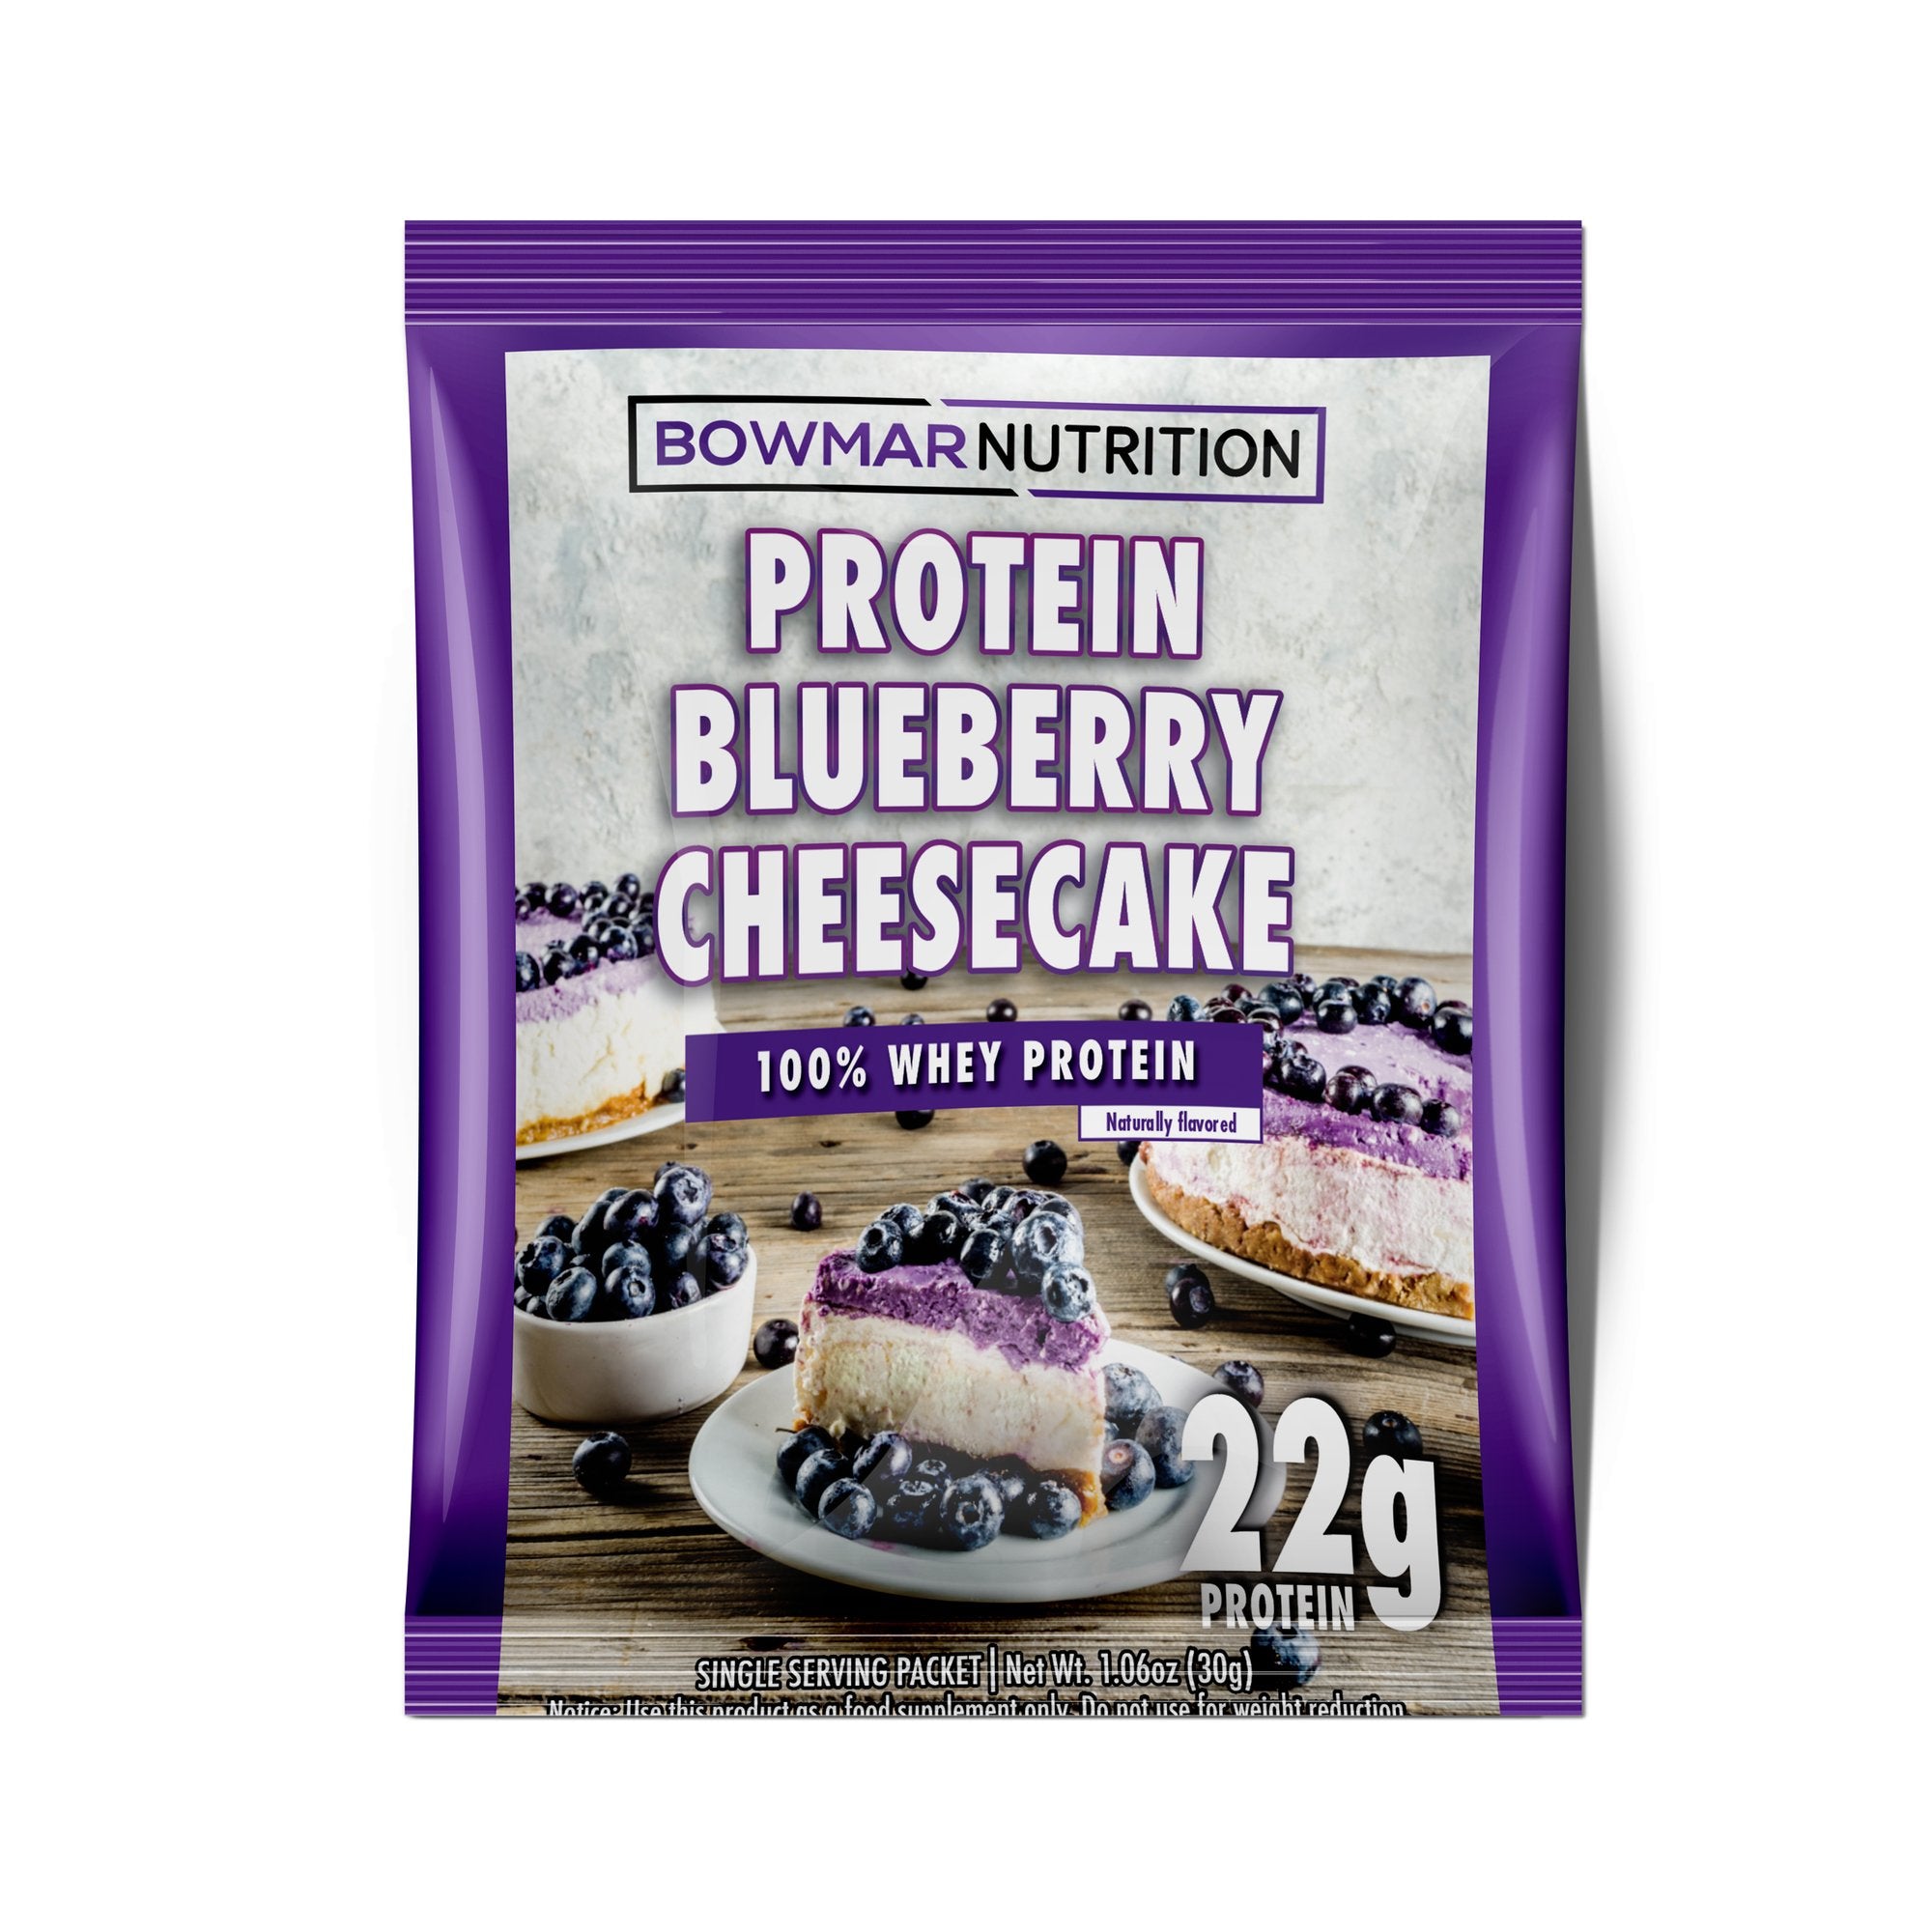 Bowmar Whey Protein Powder Sample (1 serving) Protein Snacks Blueberry Cheesecake BEST BY 10/2022 bowmar